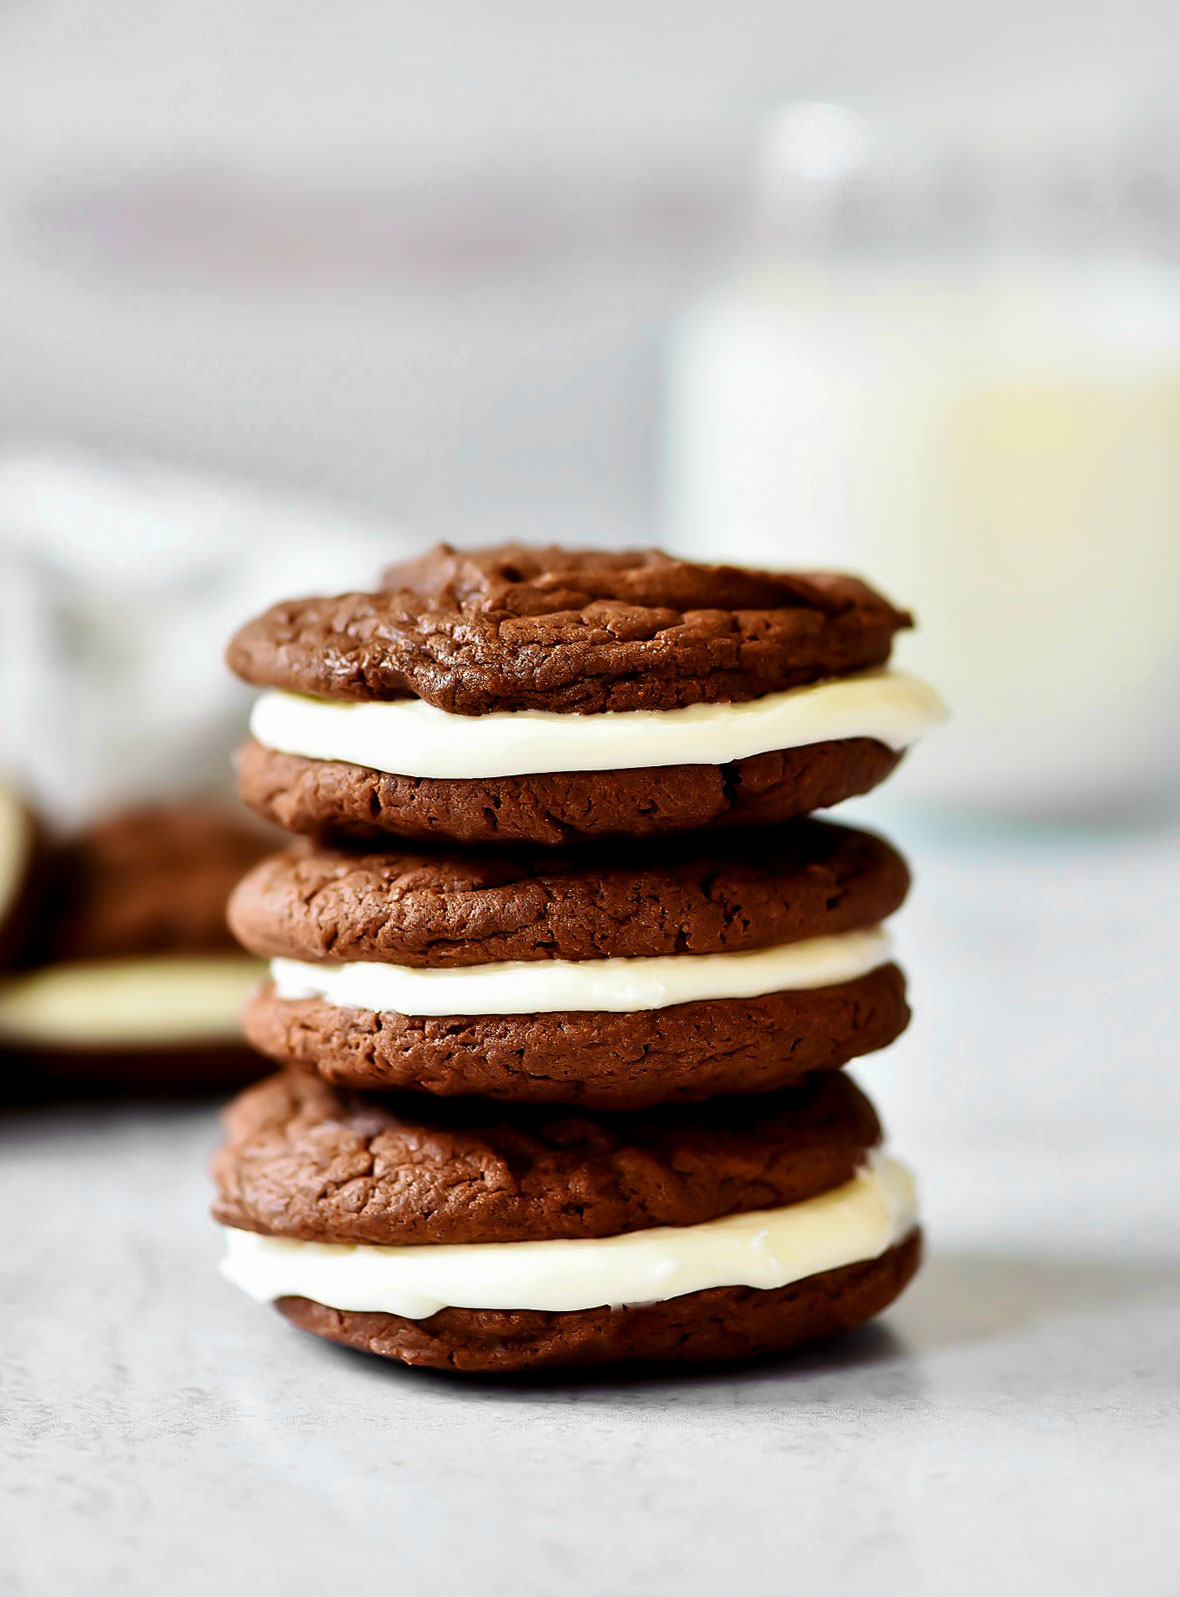 These Homemade Oreo Cookies are delicious, chocolatey cookies with a heavenly cream cheese filling. Life-in-the-Lofthouse.com